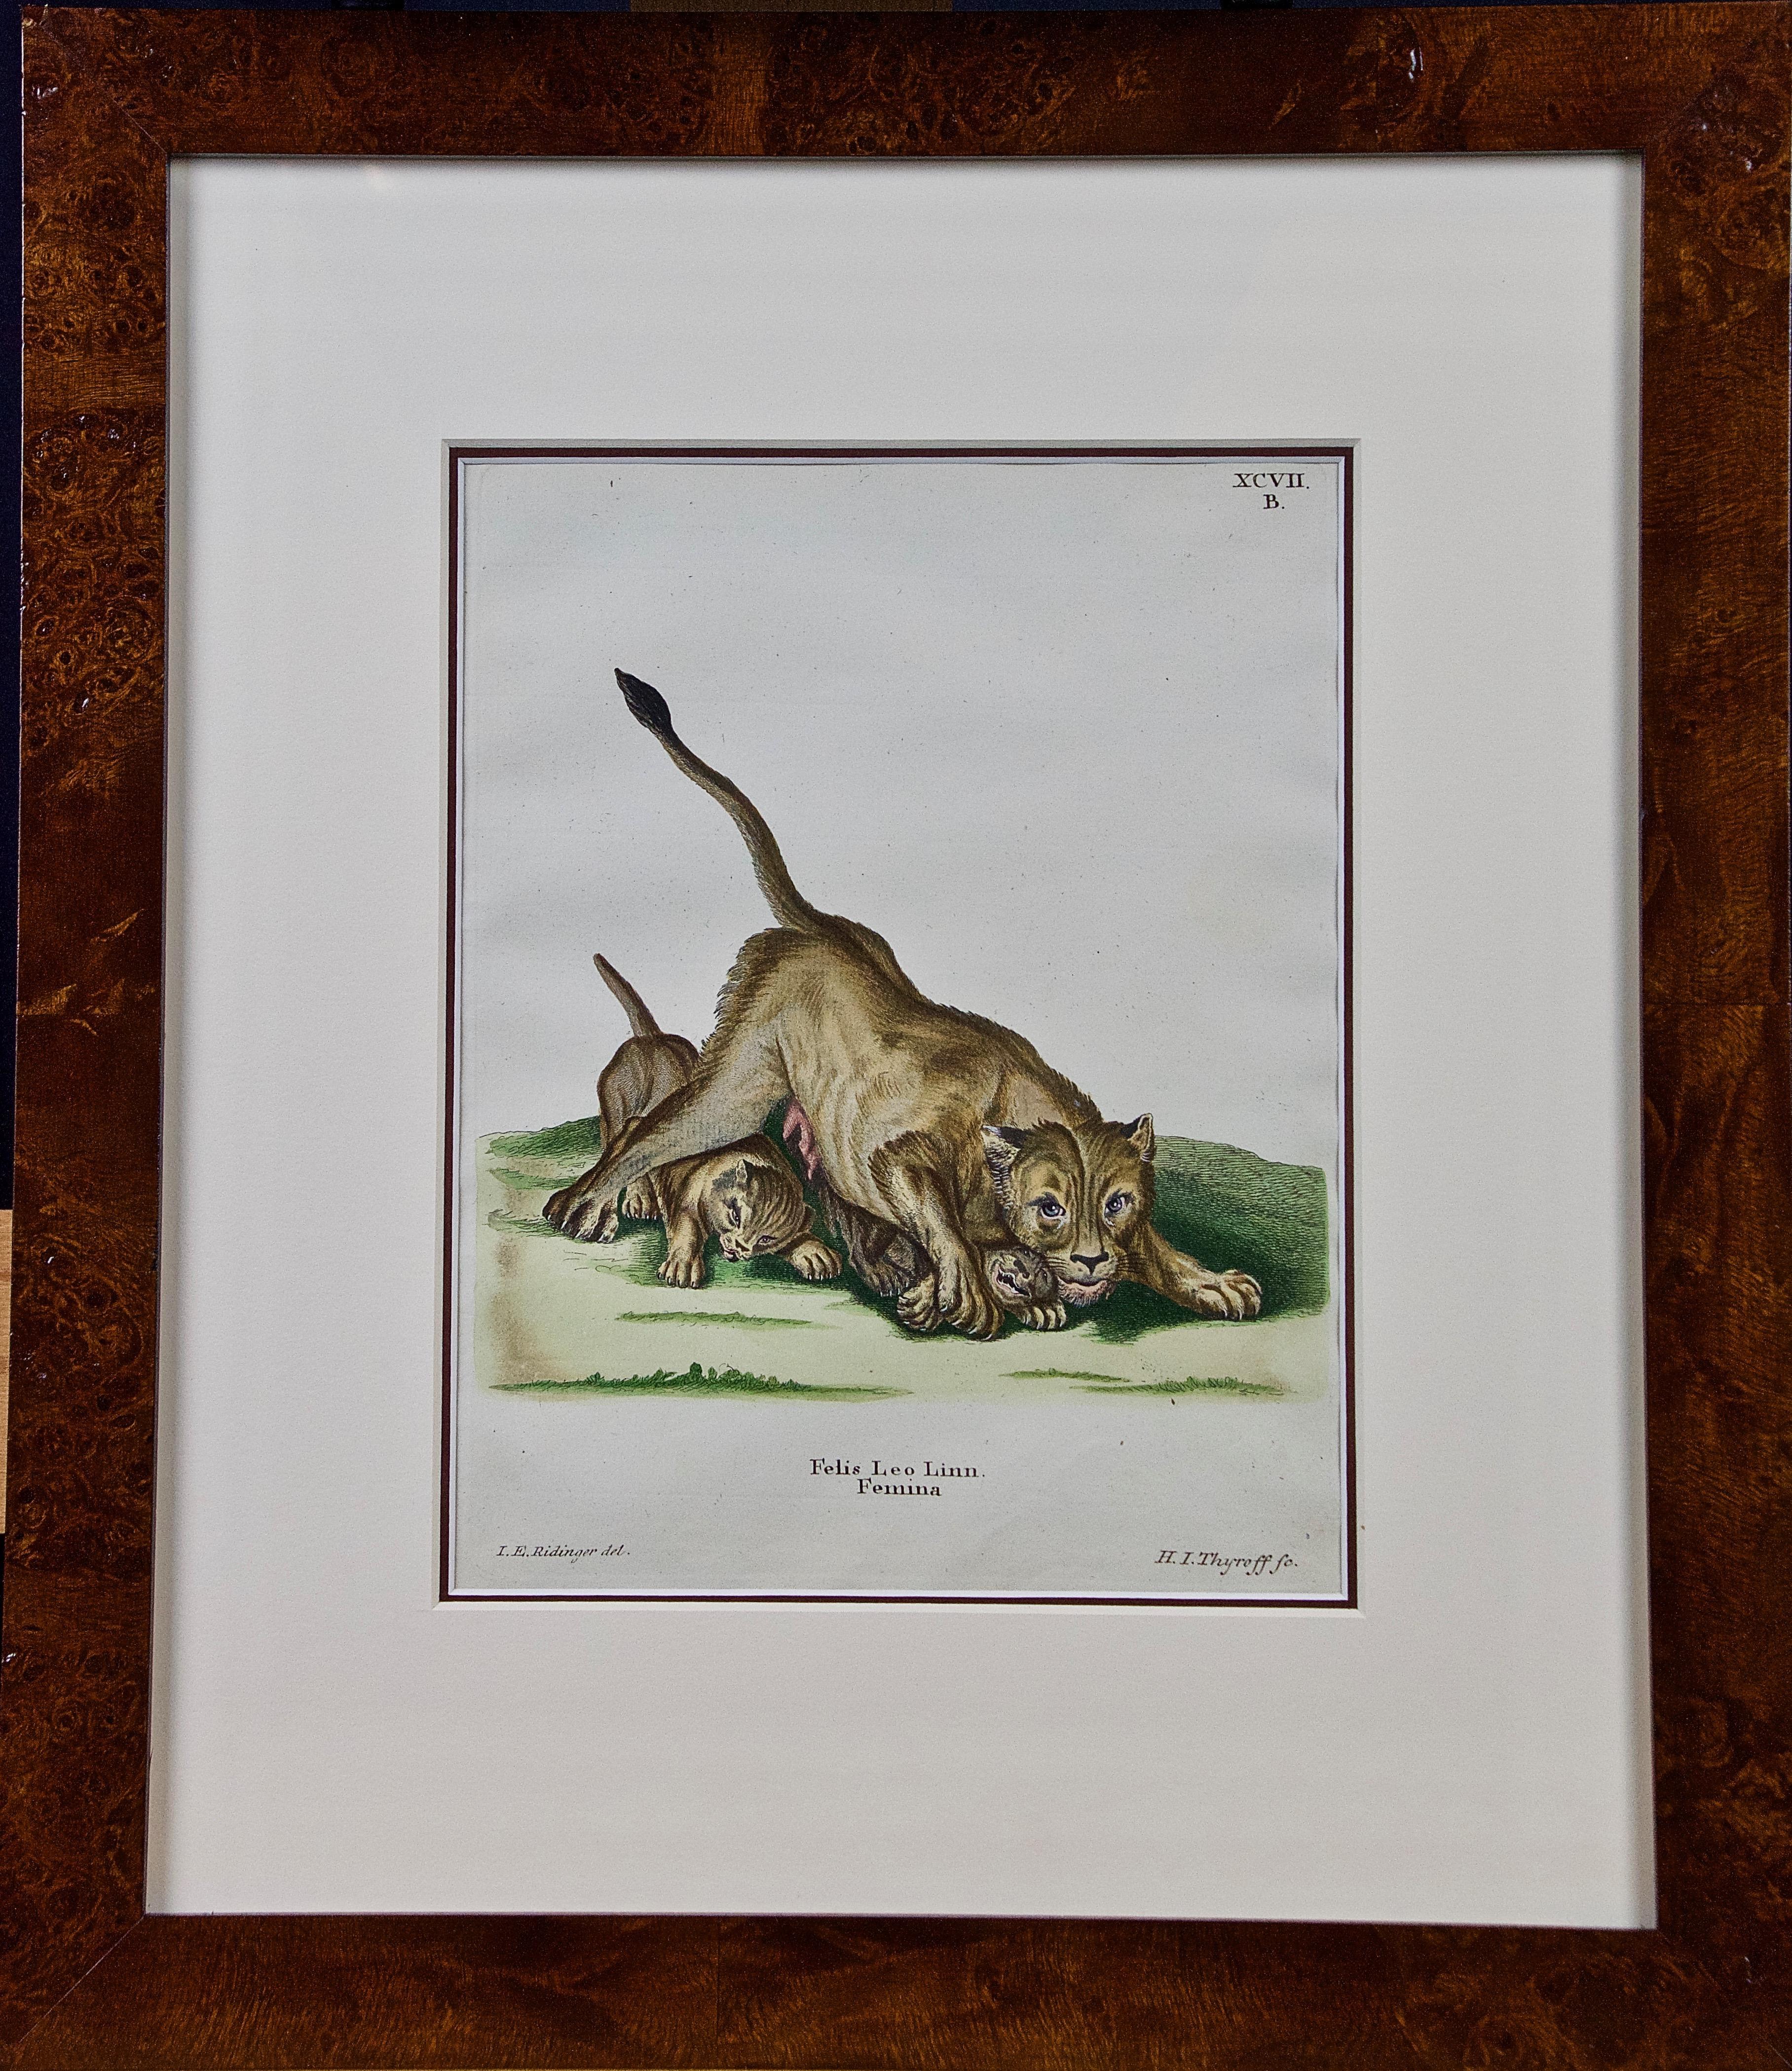 A Pair of Hand Colored Engravings of an African Lioness and her Cubs and a Rhino - Print by Johann Elias Ridinger